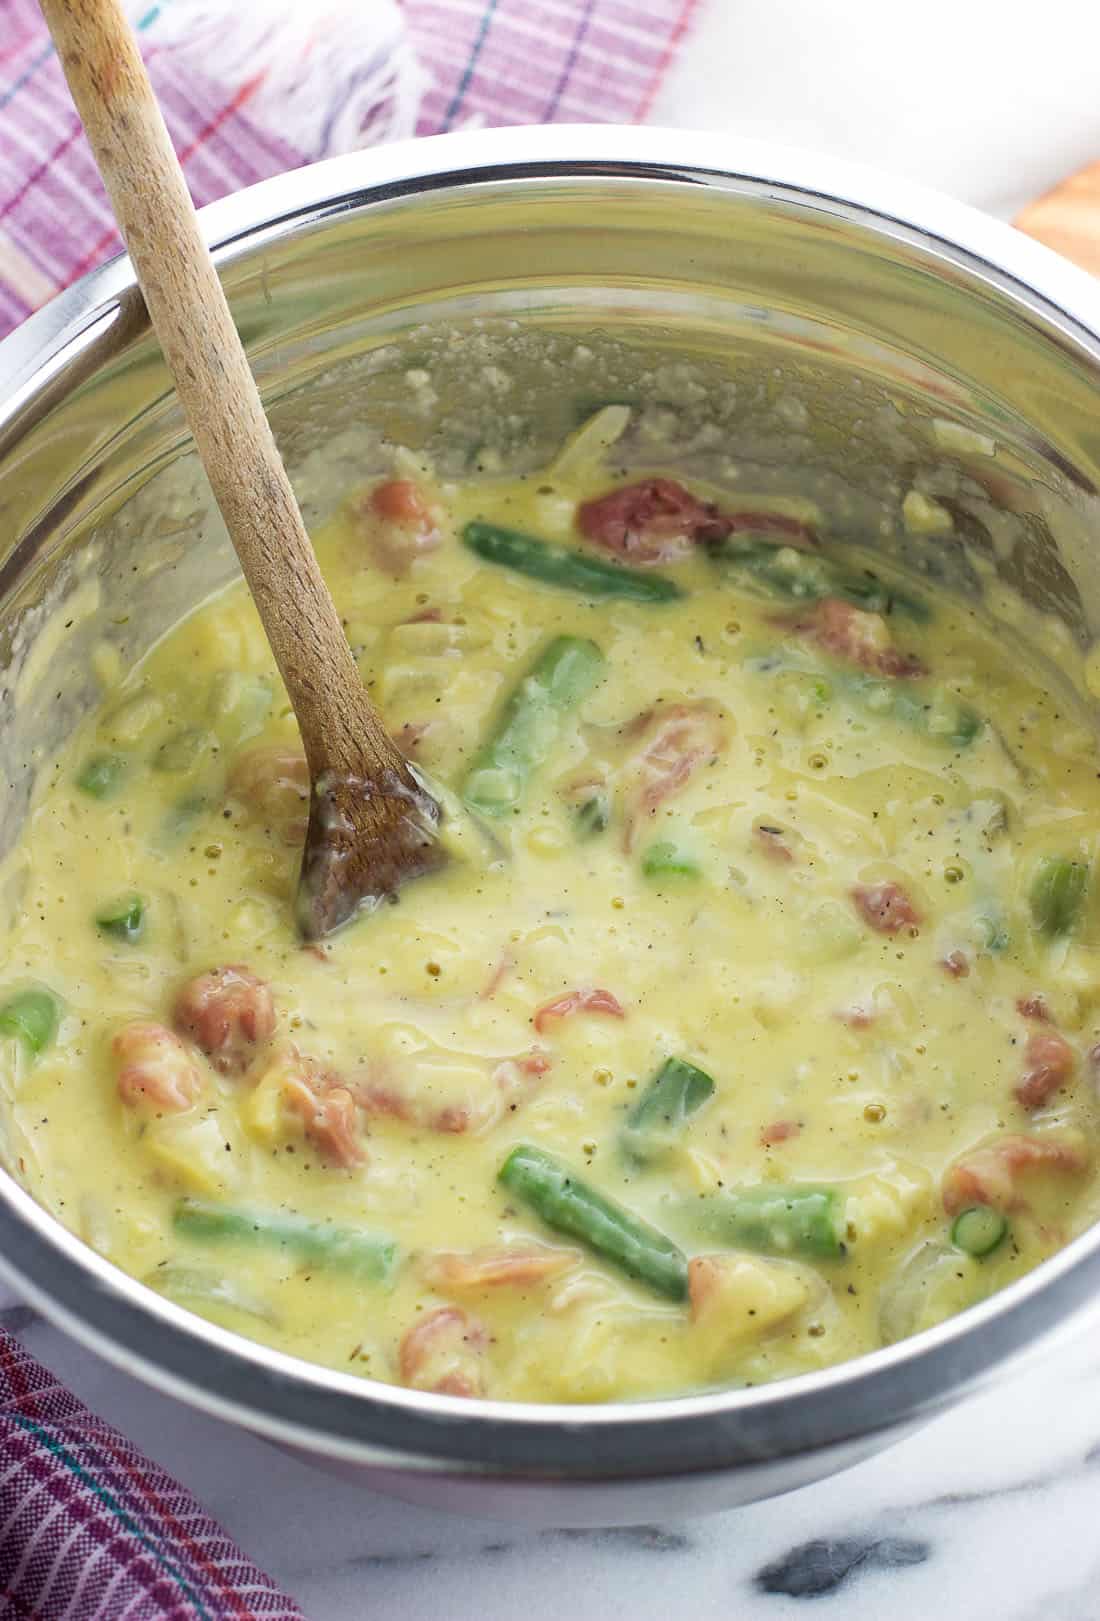 Eggs and the other quiche filling ingredients stirred together in a metal mixing bowl with a wooden spoon